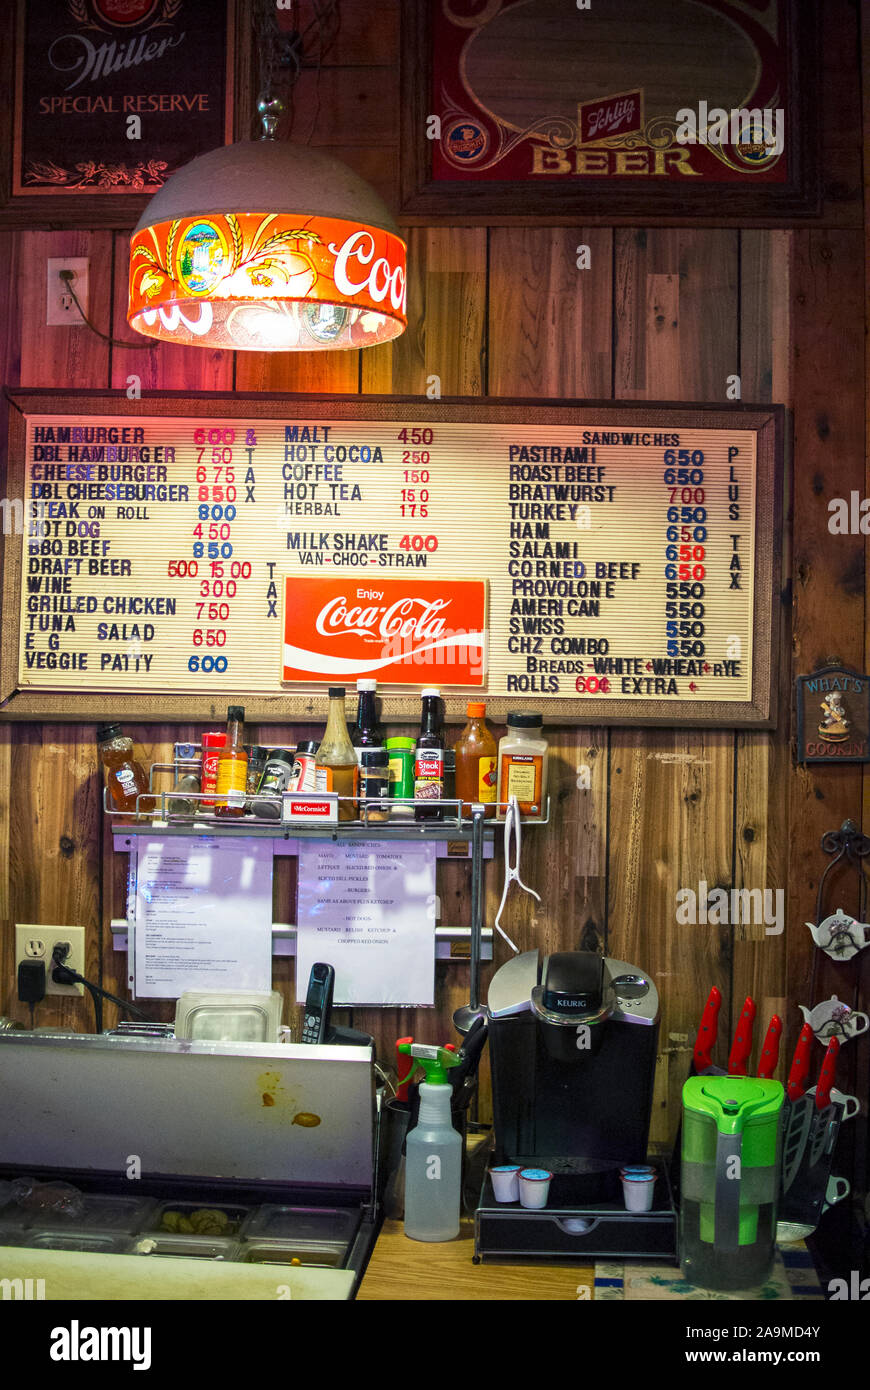 Menu board and food prep area of an old fashioned tavern restaurant Stock Photo